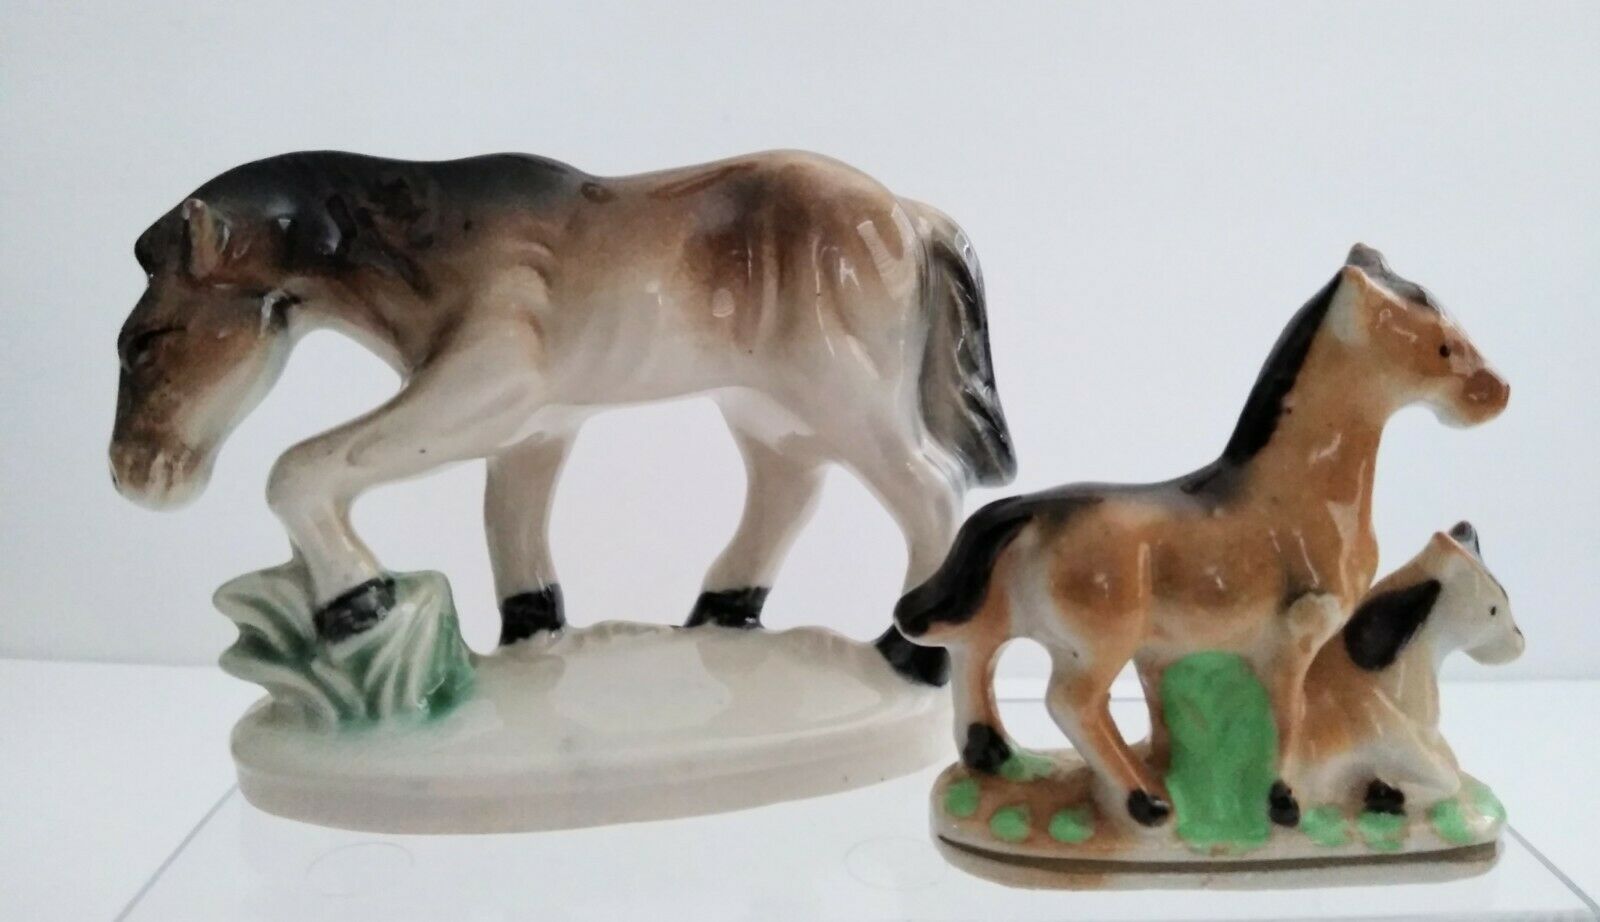 Vtg S/2 Horse Ceramic Figurines Made In Japan 3.5" Single Horse 3" Mare W Foal